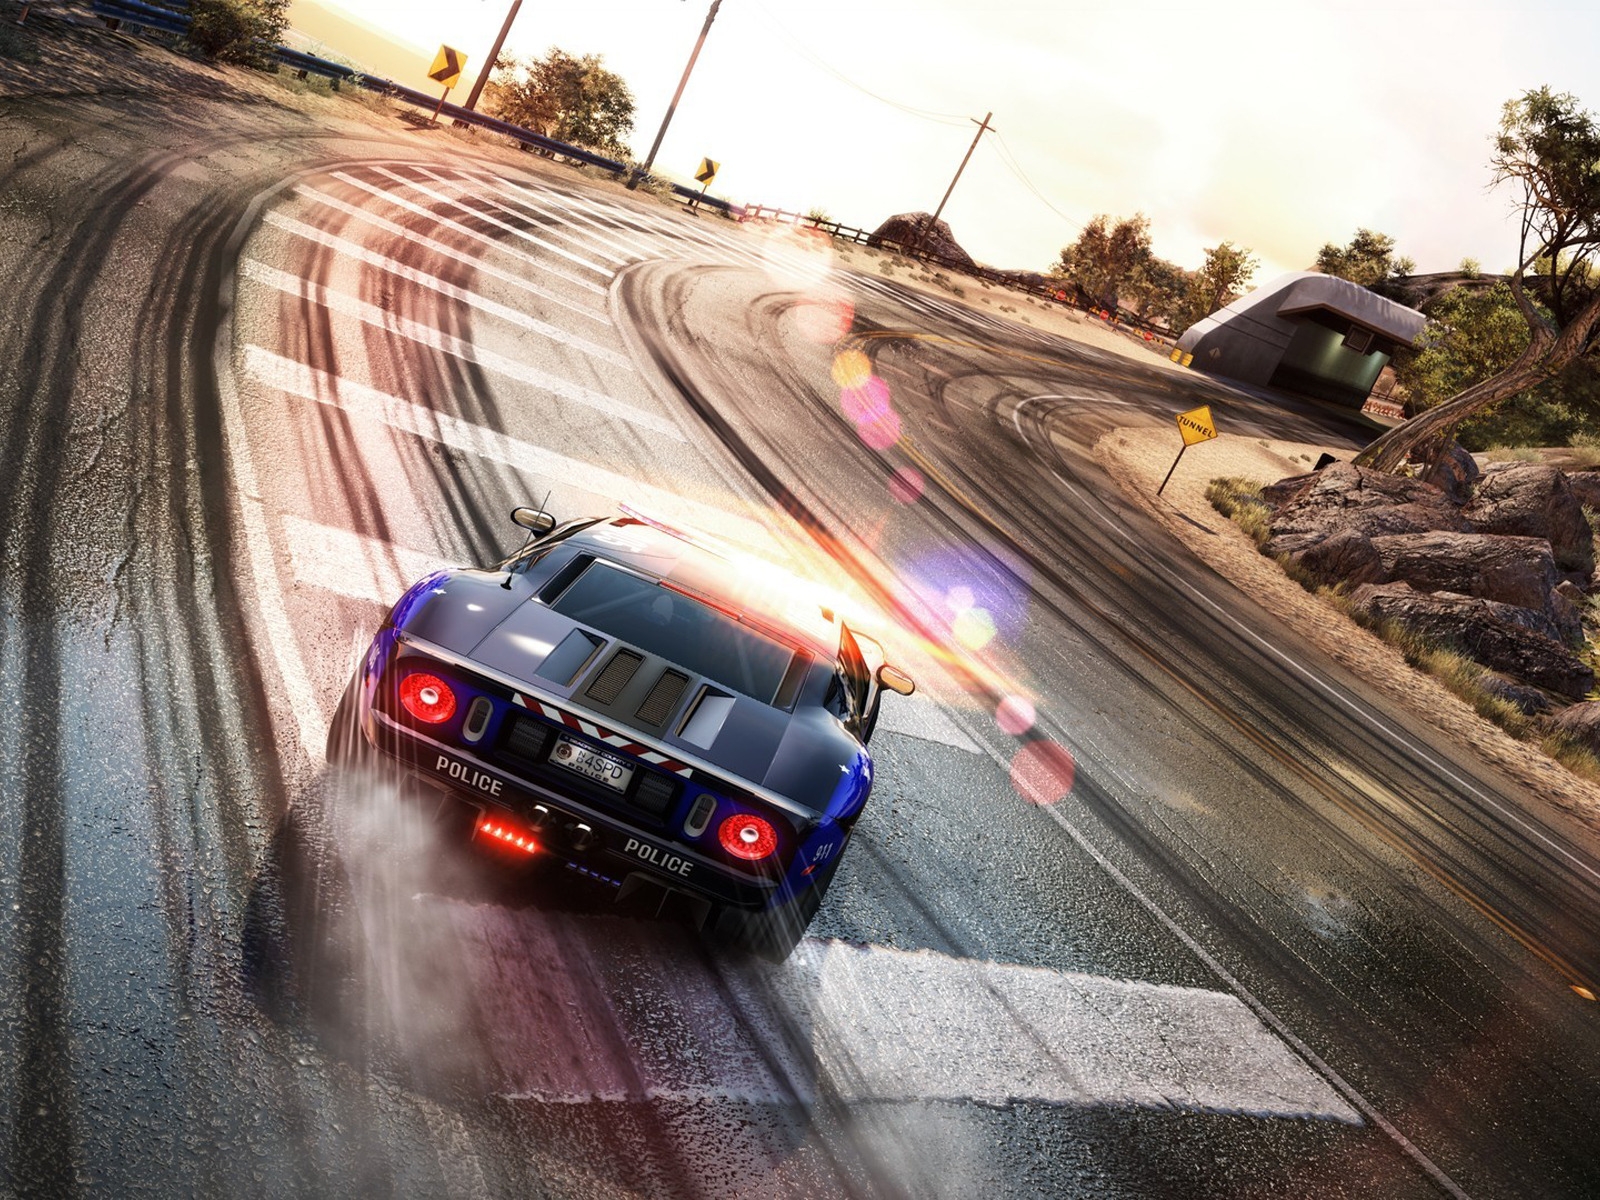 NFS Hot Pursuit for 1600 x 1200 resolution